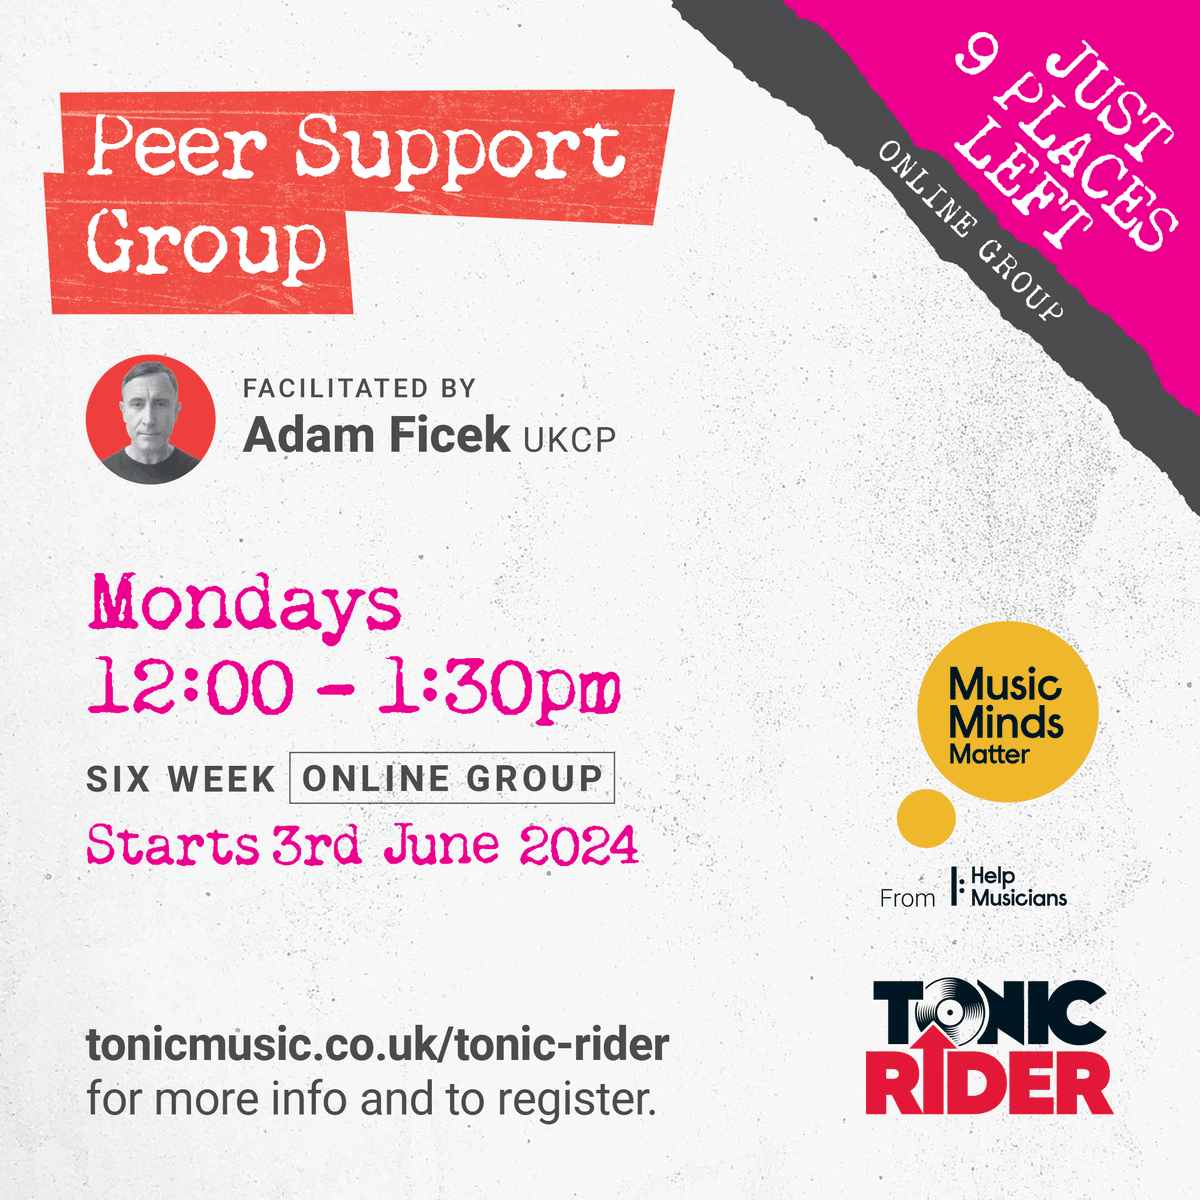 Join us in June! Open to ALL artists, crew & industry professionals! FREE online Peer Support Group - with @helpmusicians (facilitated by @adamficek) To register > tonicmusic.co.uk/tonic-rider #TonicRider #MusicMindsMatter #MentalHealth #Wellbeing #Music